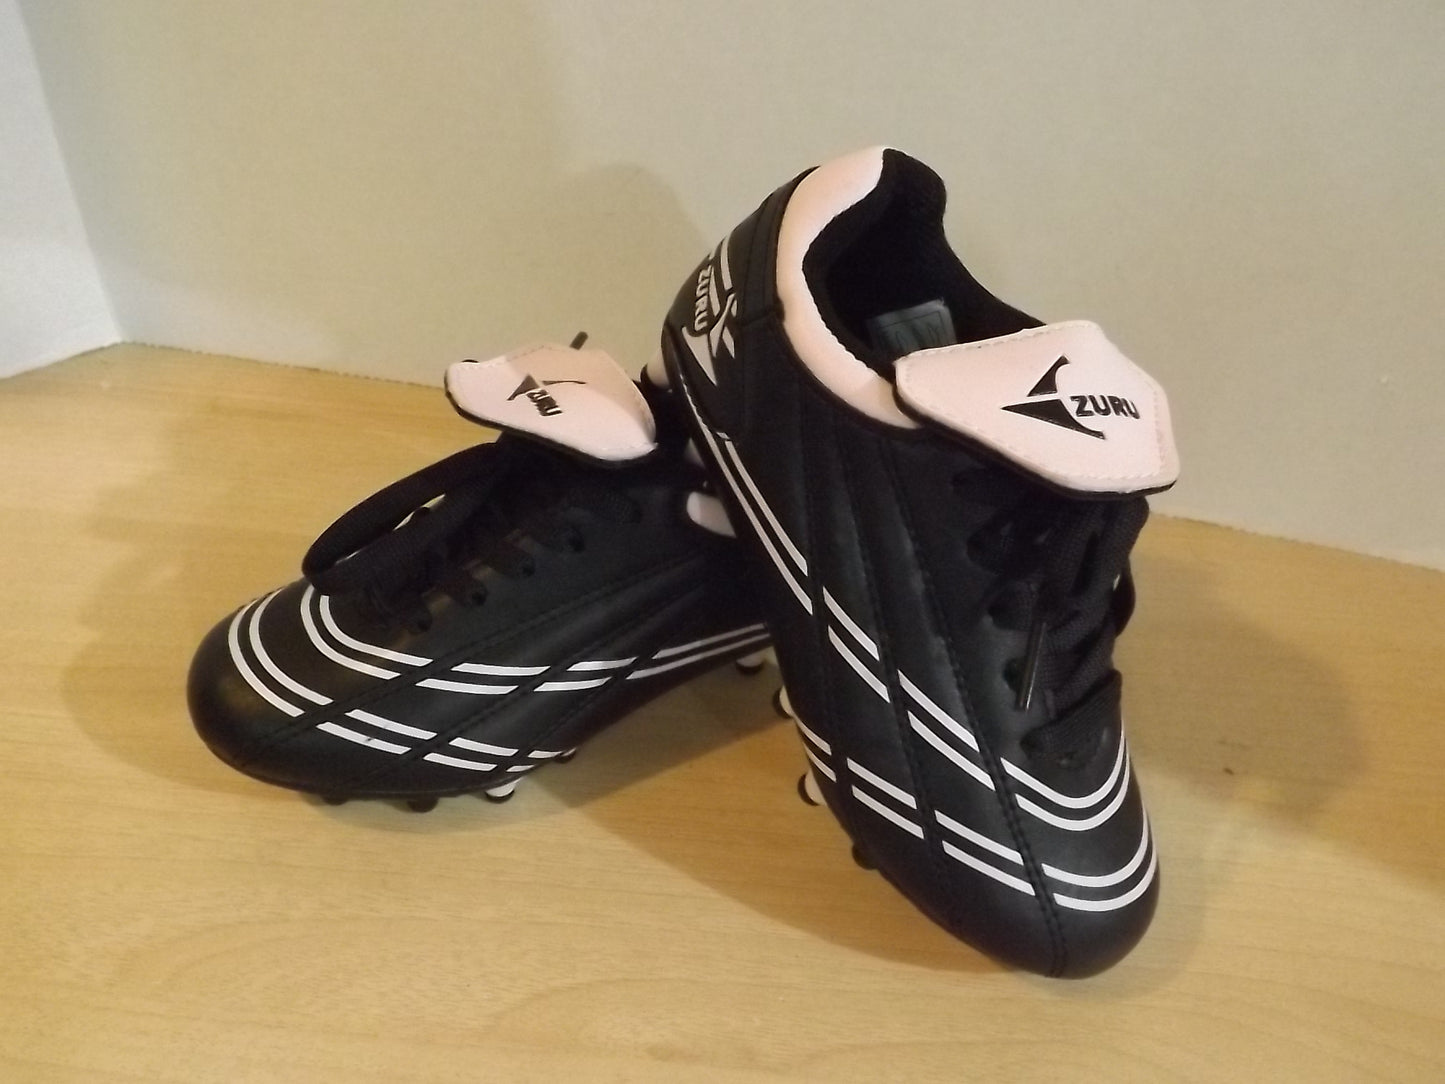 Soccer Shoes Cleats Child Size 13 Zuru Pink White New